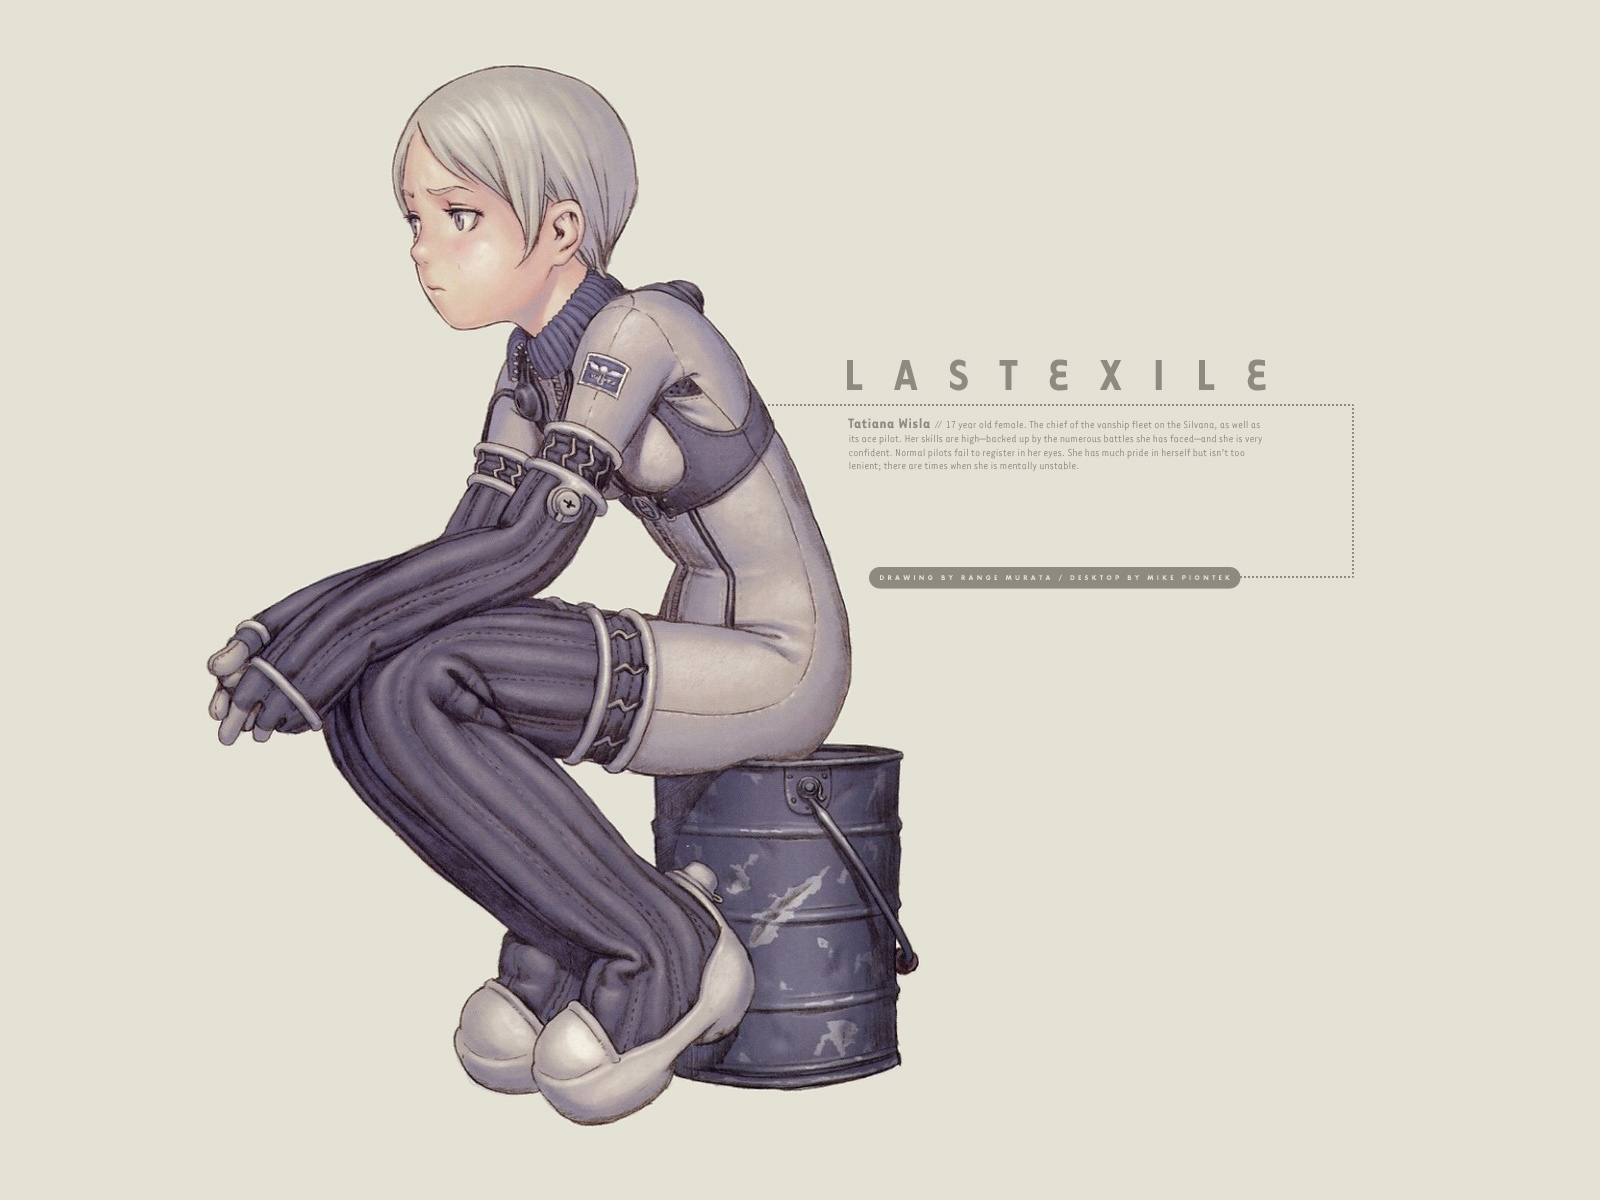 42 Last Exile Wallpapers | HD Backgrounds - Wallpaper Abyss